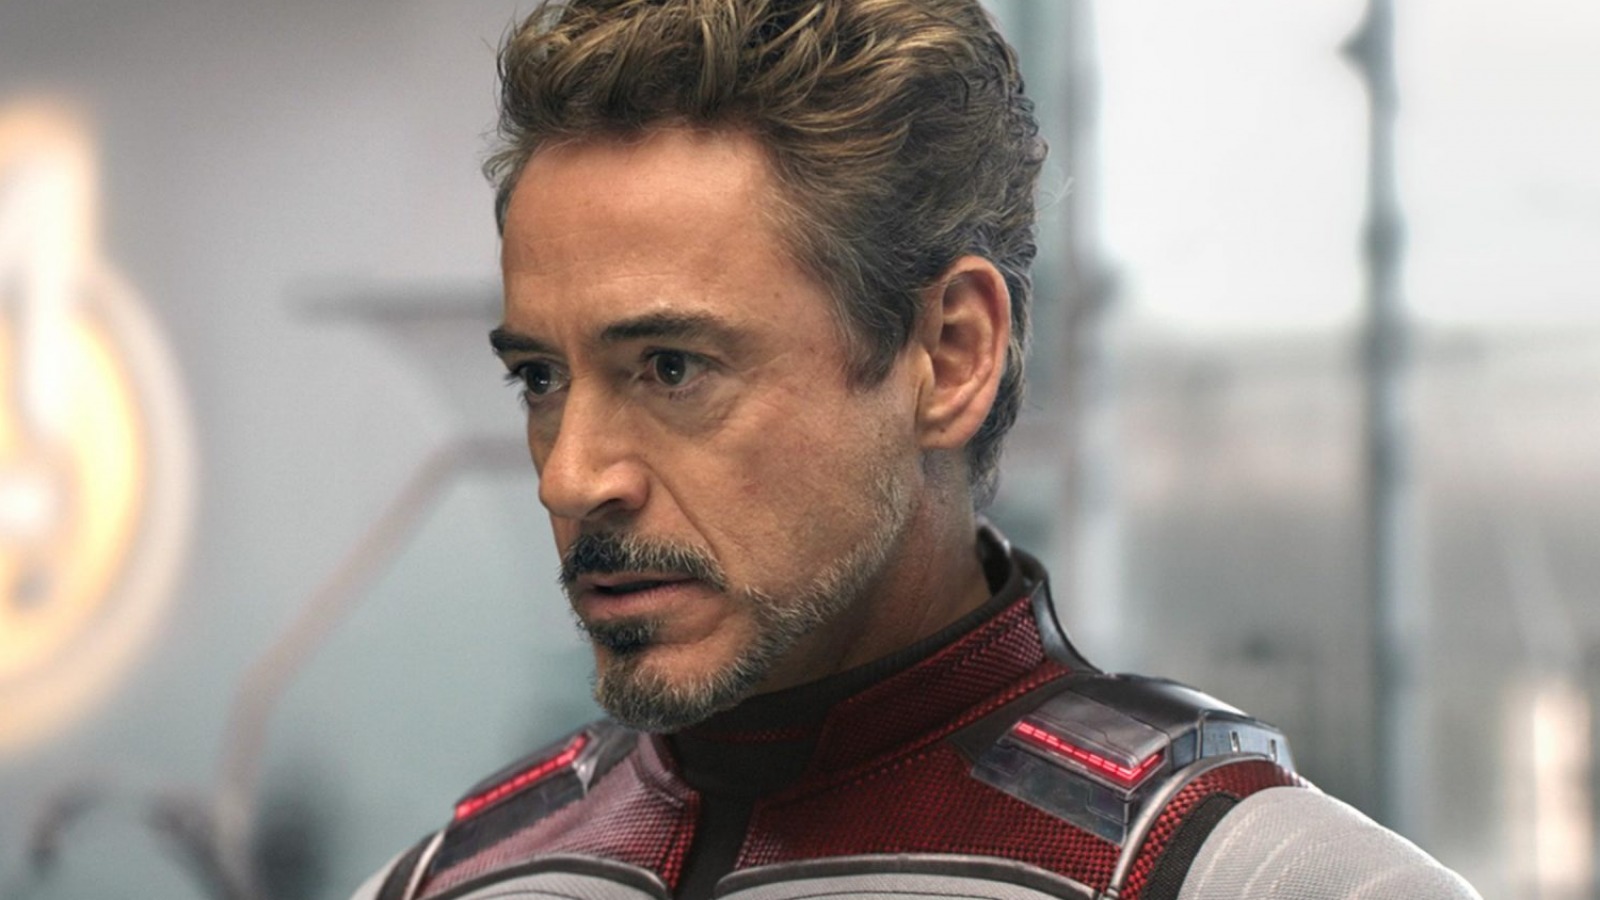 The Best And Worst Robert Downey Jr. Movies According To Rotten Tomatoes